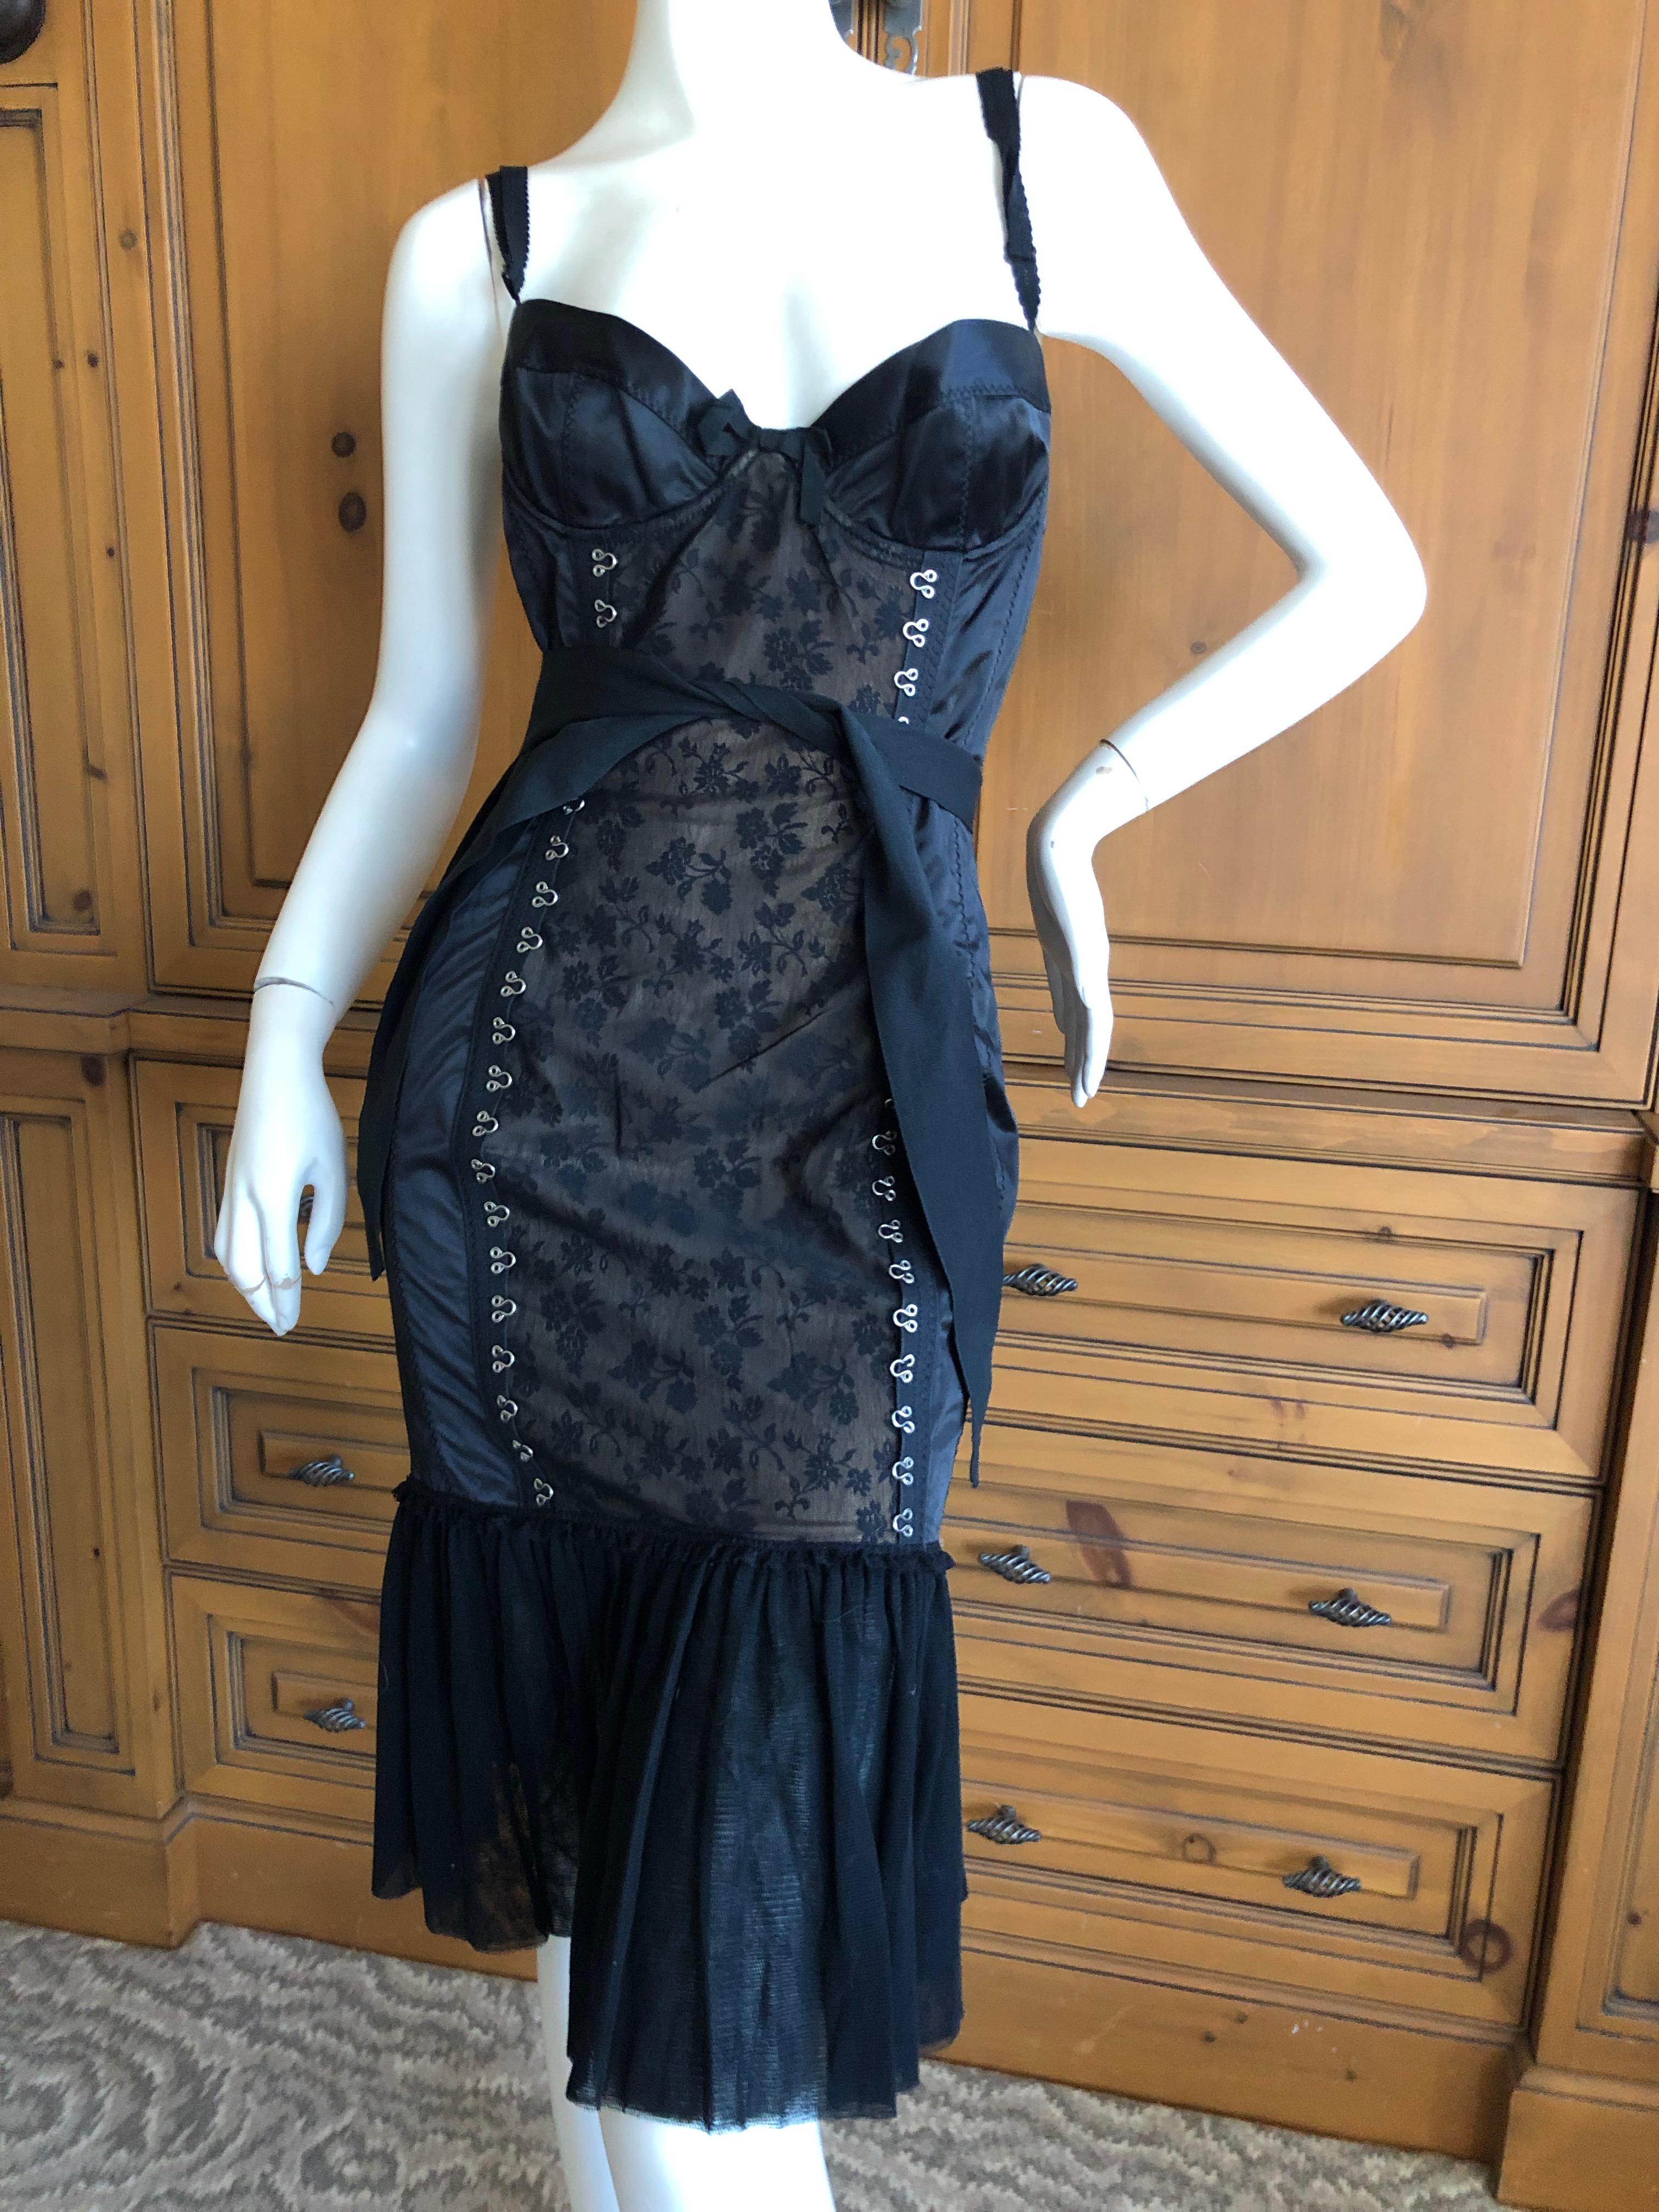 Moschino Cheap & Chic Vintage LBD Dress and Jacket with Corset Stay Details New For Sale 1